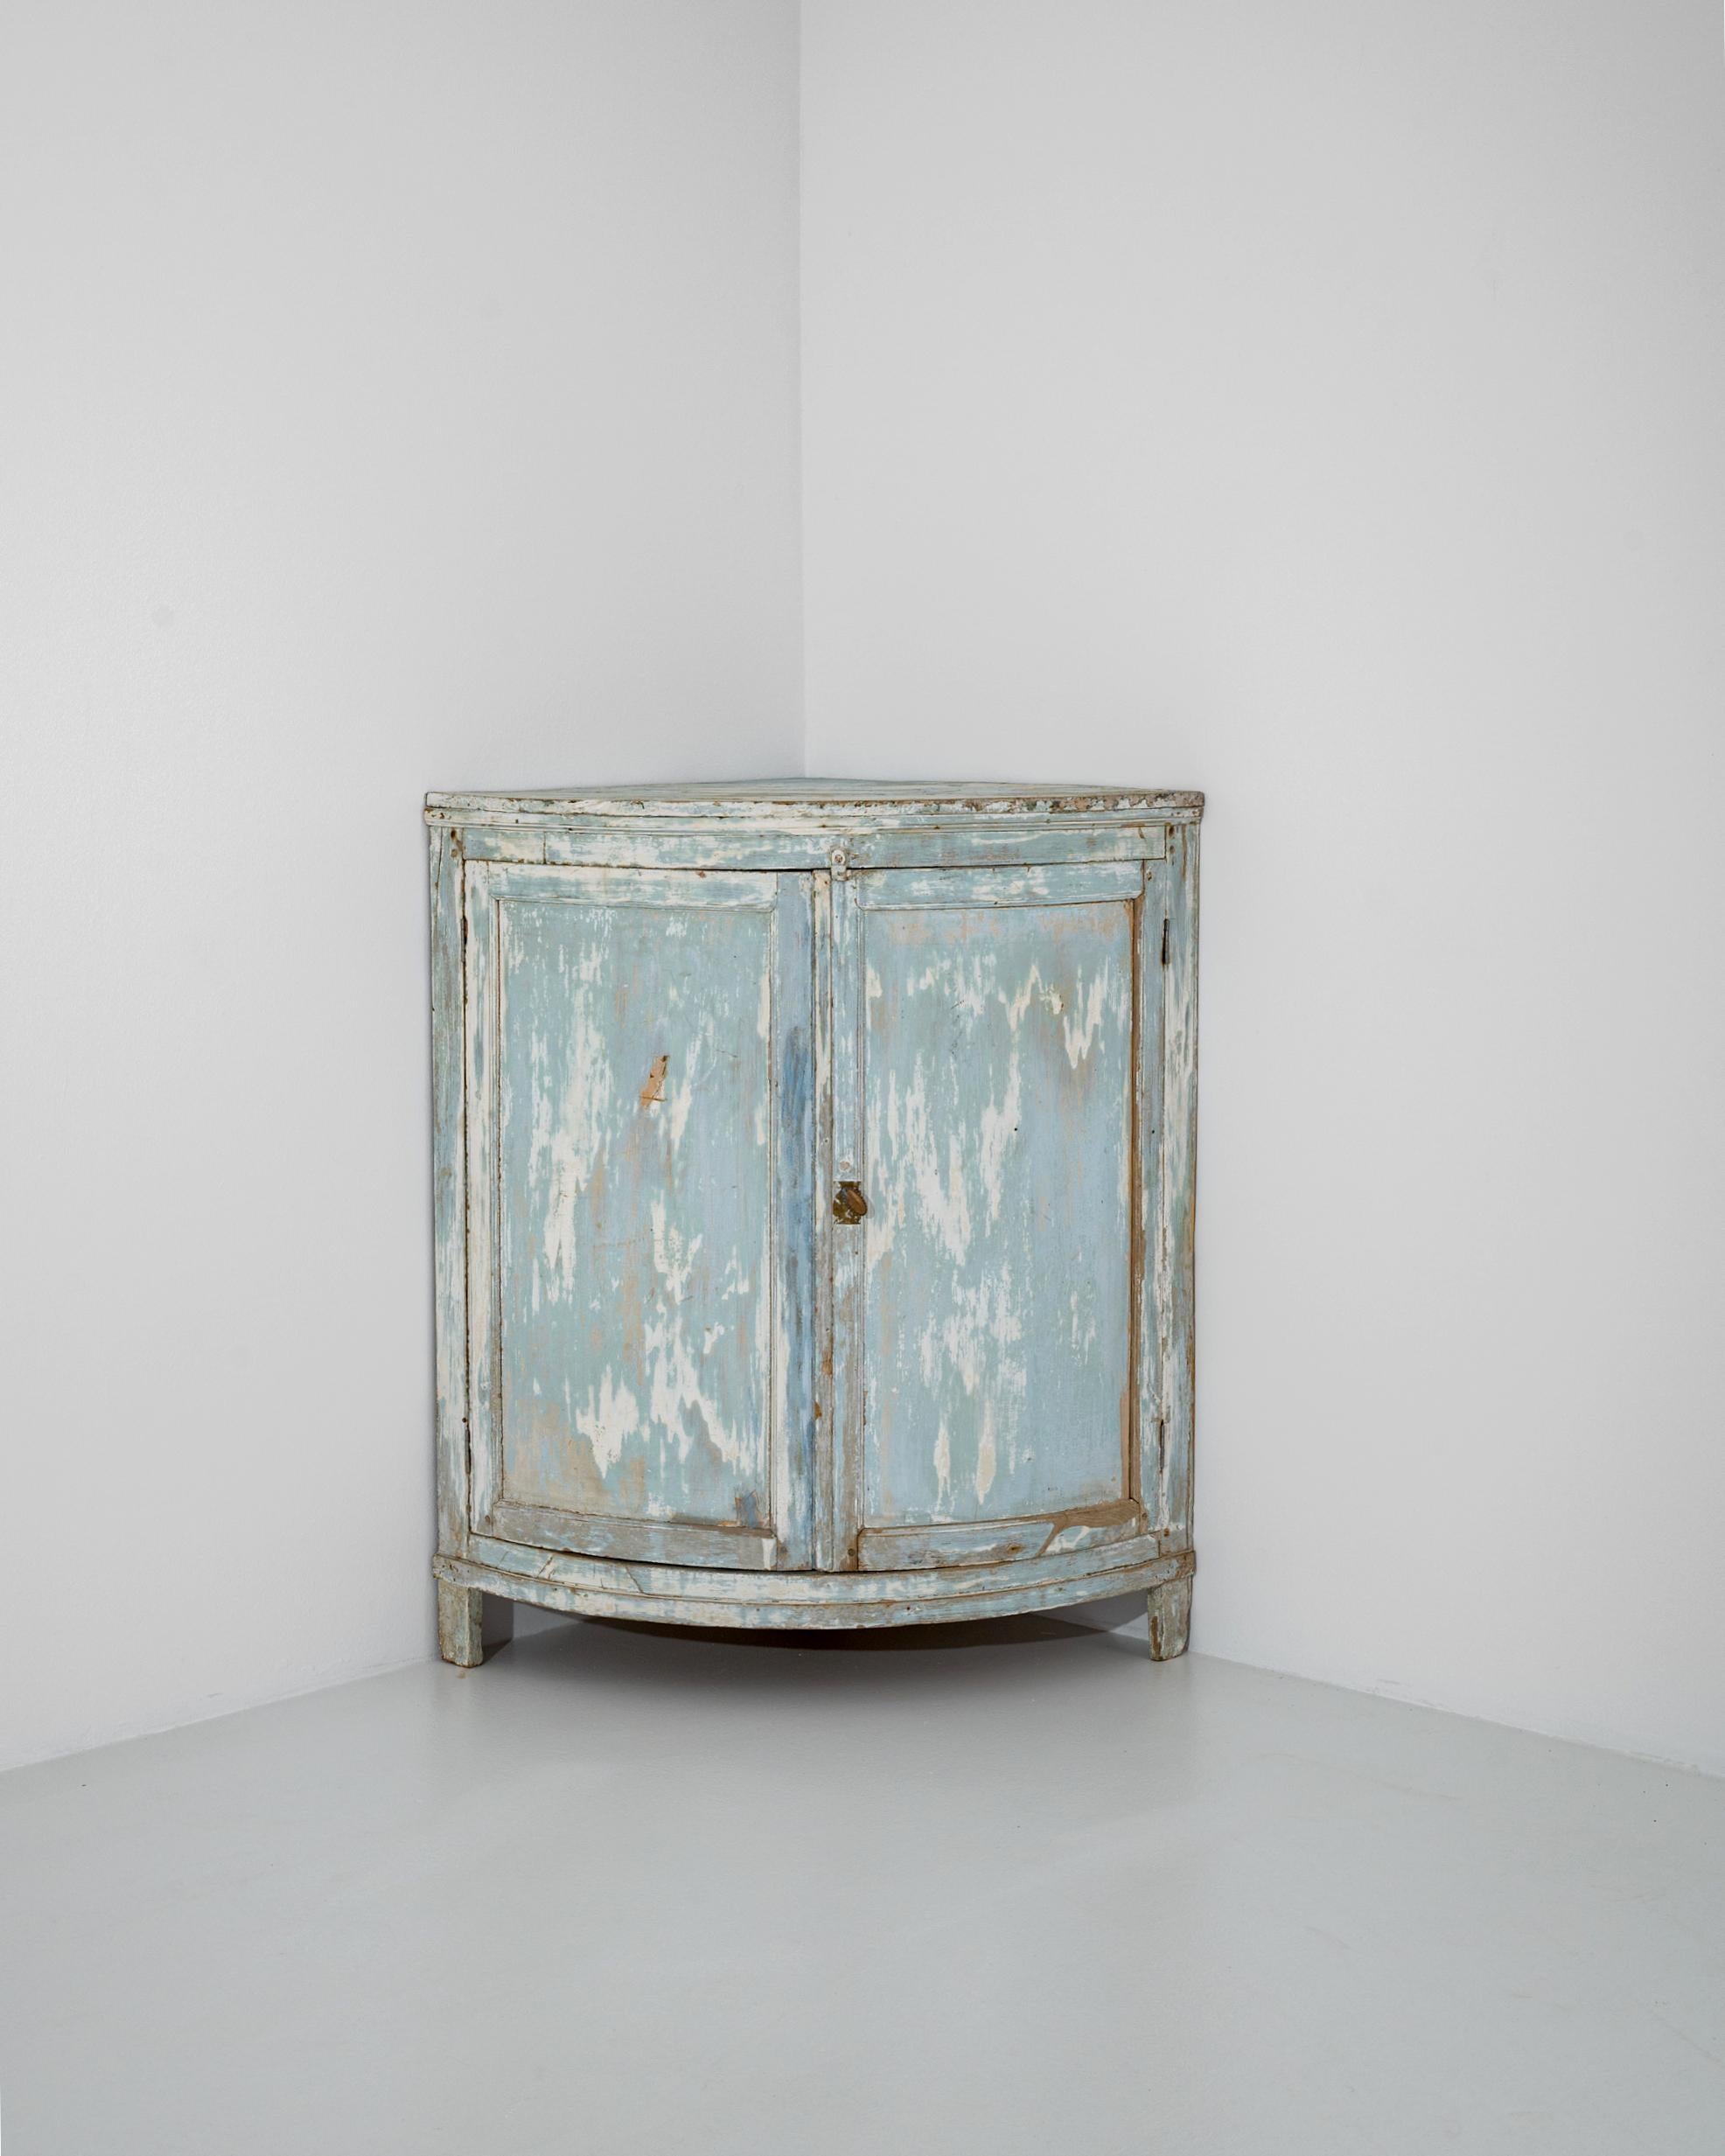 A clean, curving form and a baby blue patina gives this antique wooden cabinet an air of country simplicity. Made in France in the 1800s, the cabinet is built to fit perfectly into the corner of a room —an astute way of making use of space that